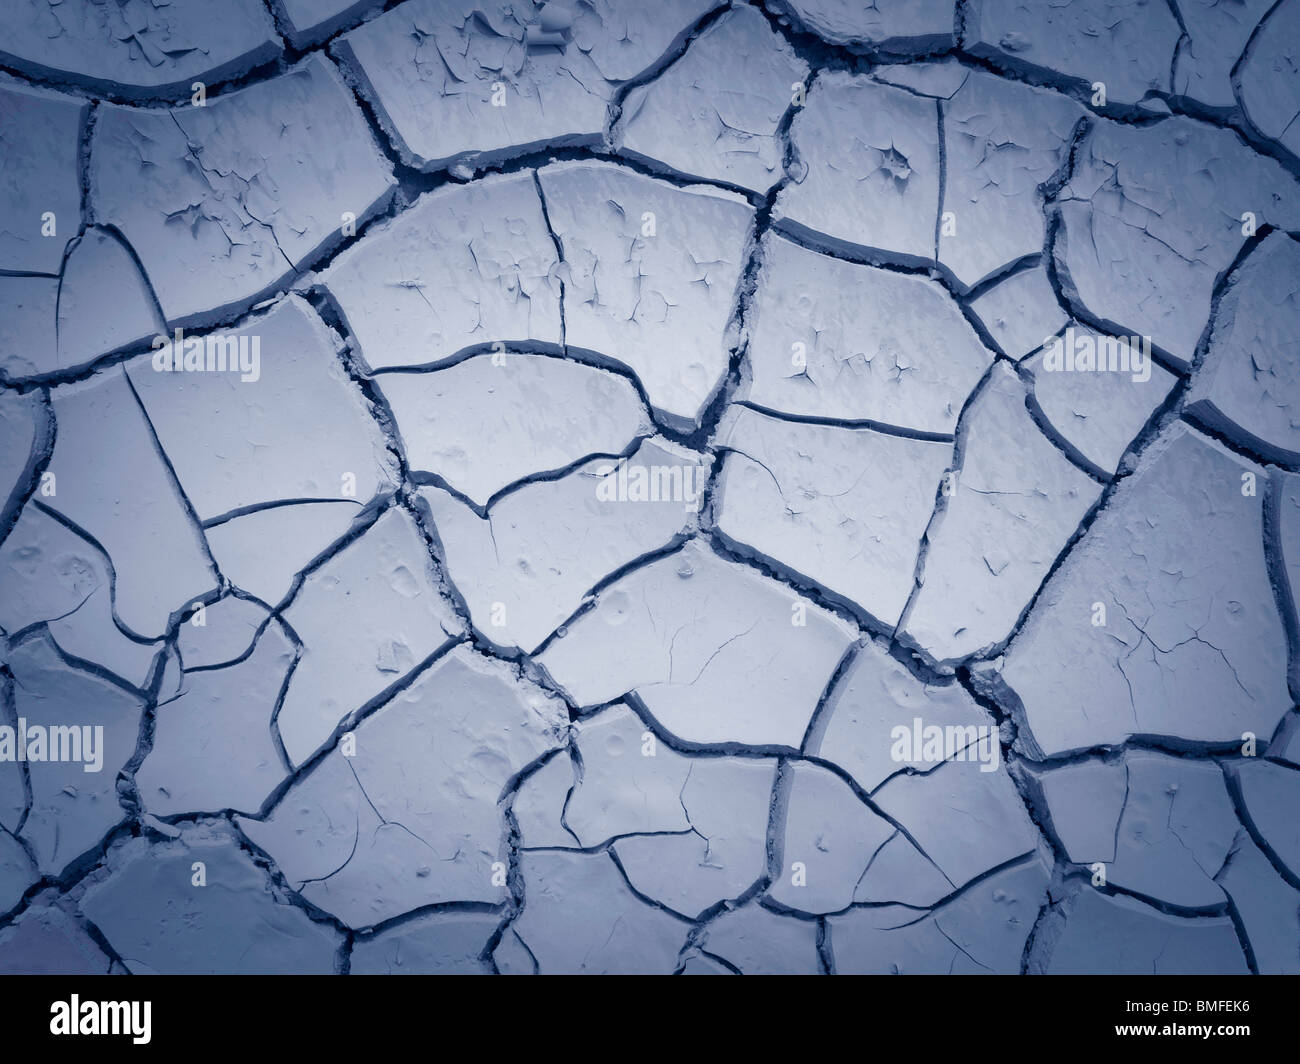 parched earth, the effect of global warming or climate change Stock Photo